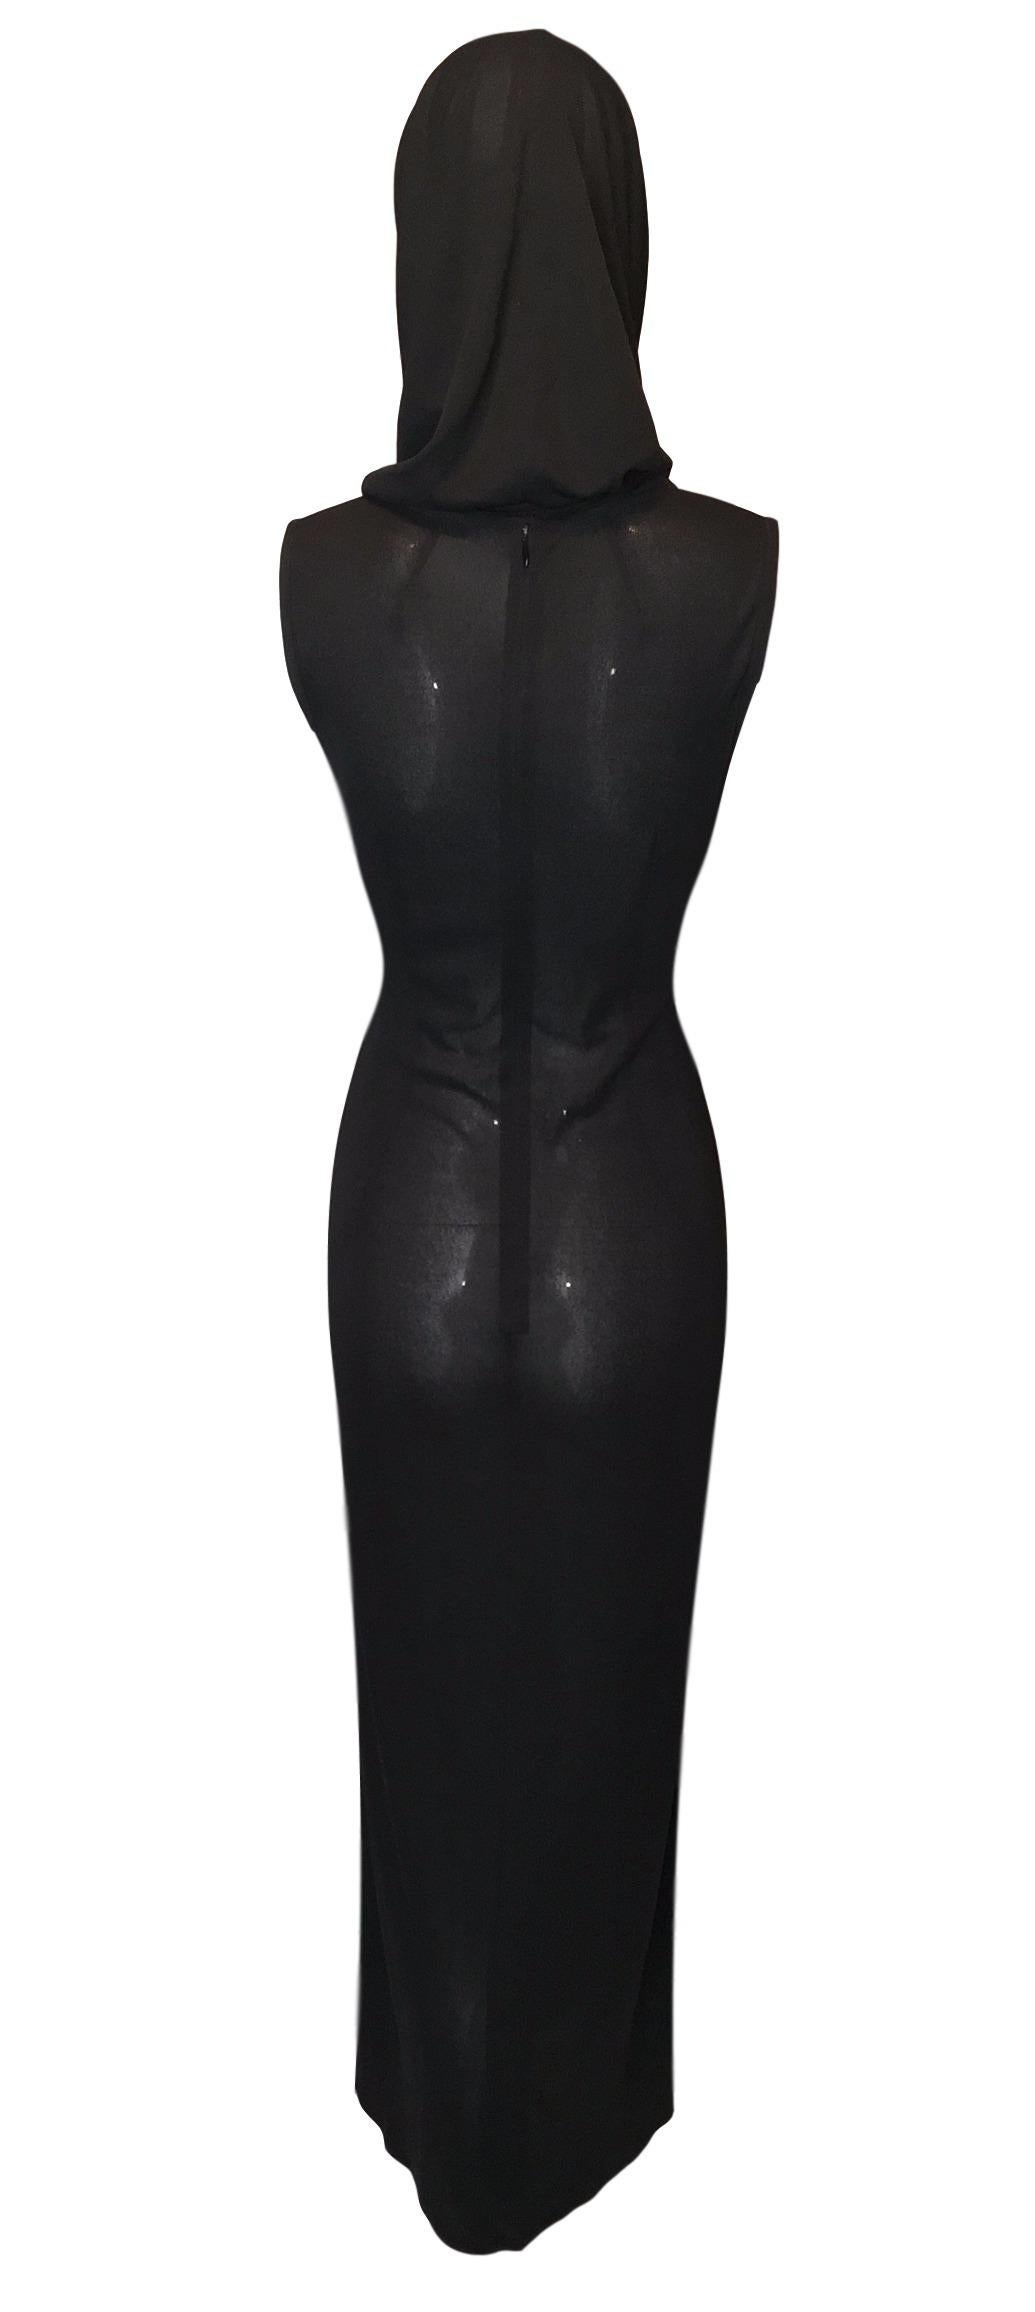 S/S 1996 Dolce & Gabbana Runway Black Sheer Hooded Dress In Excellent Condition In Yukon, OK